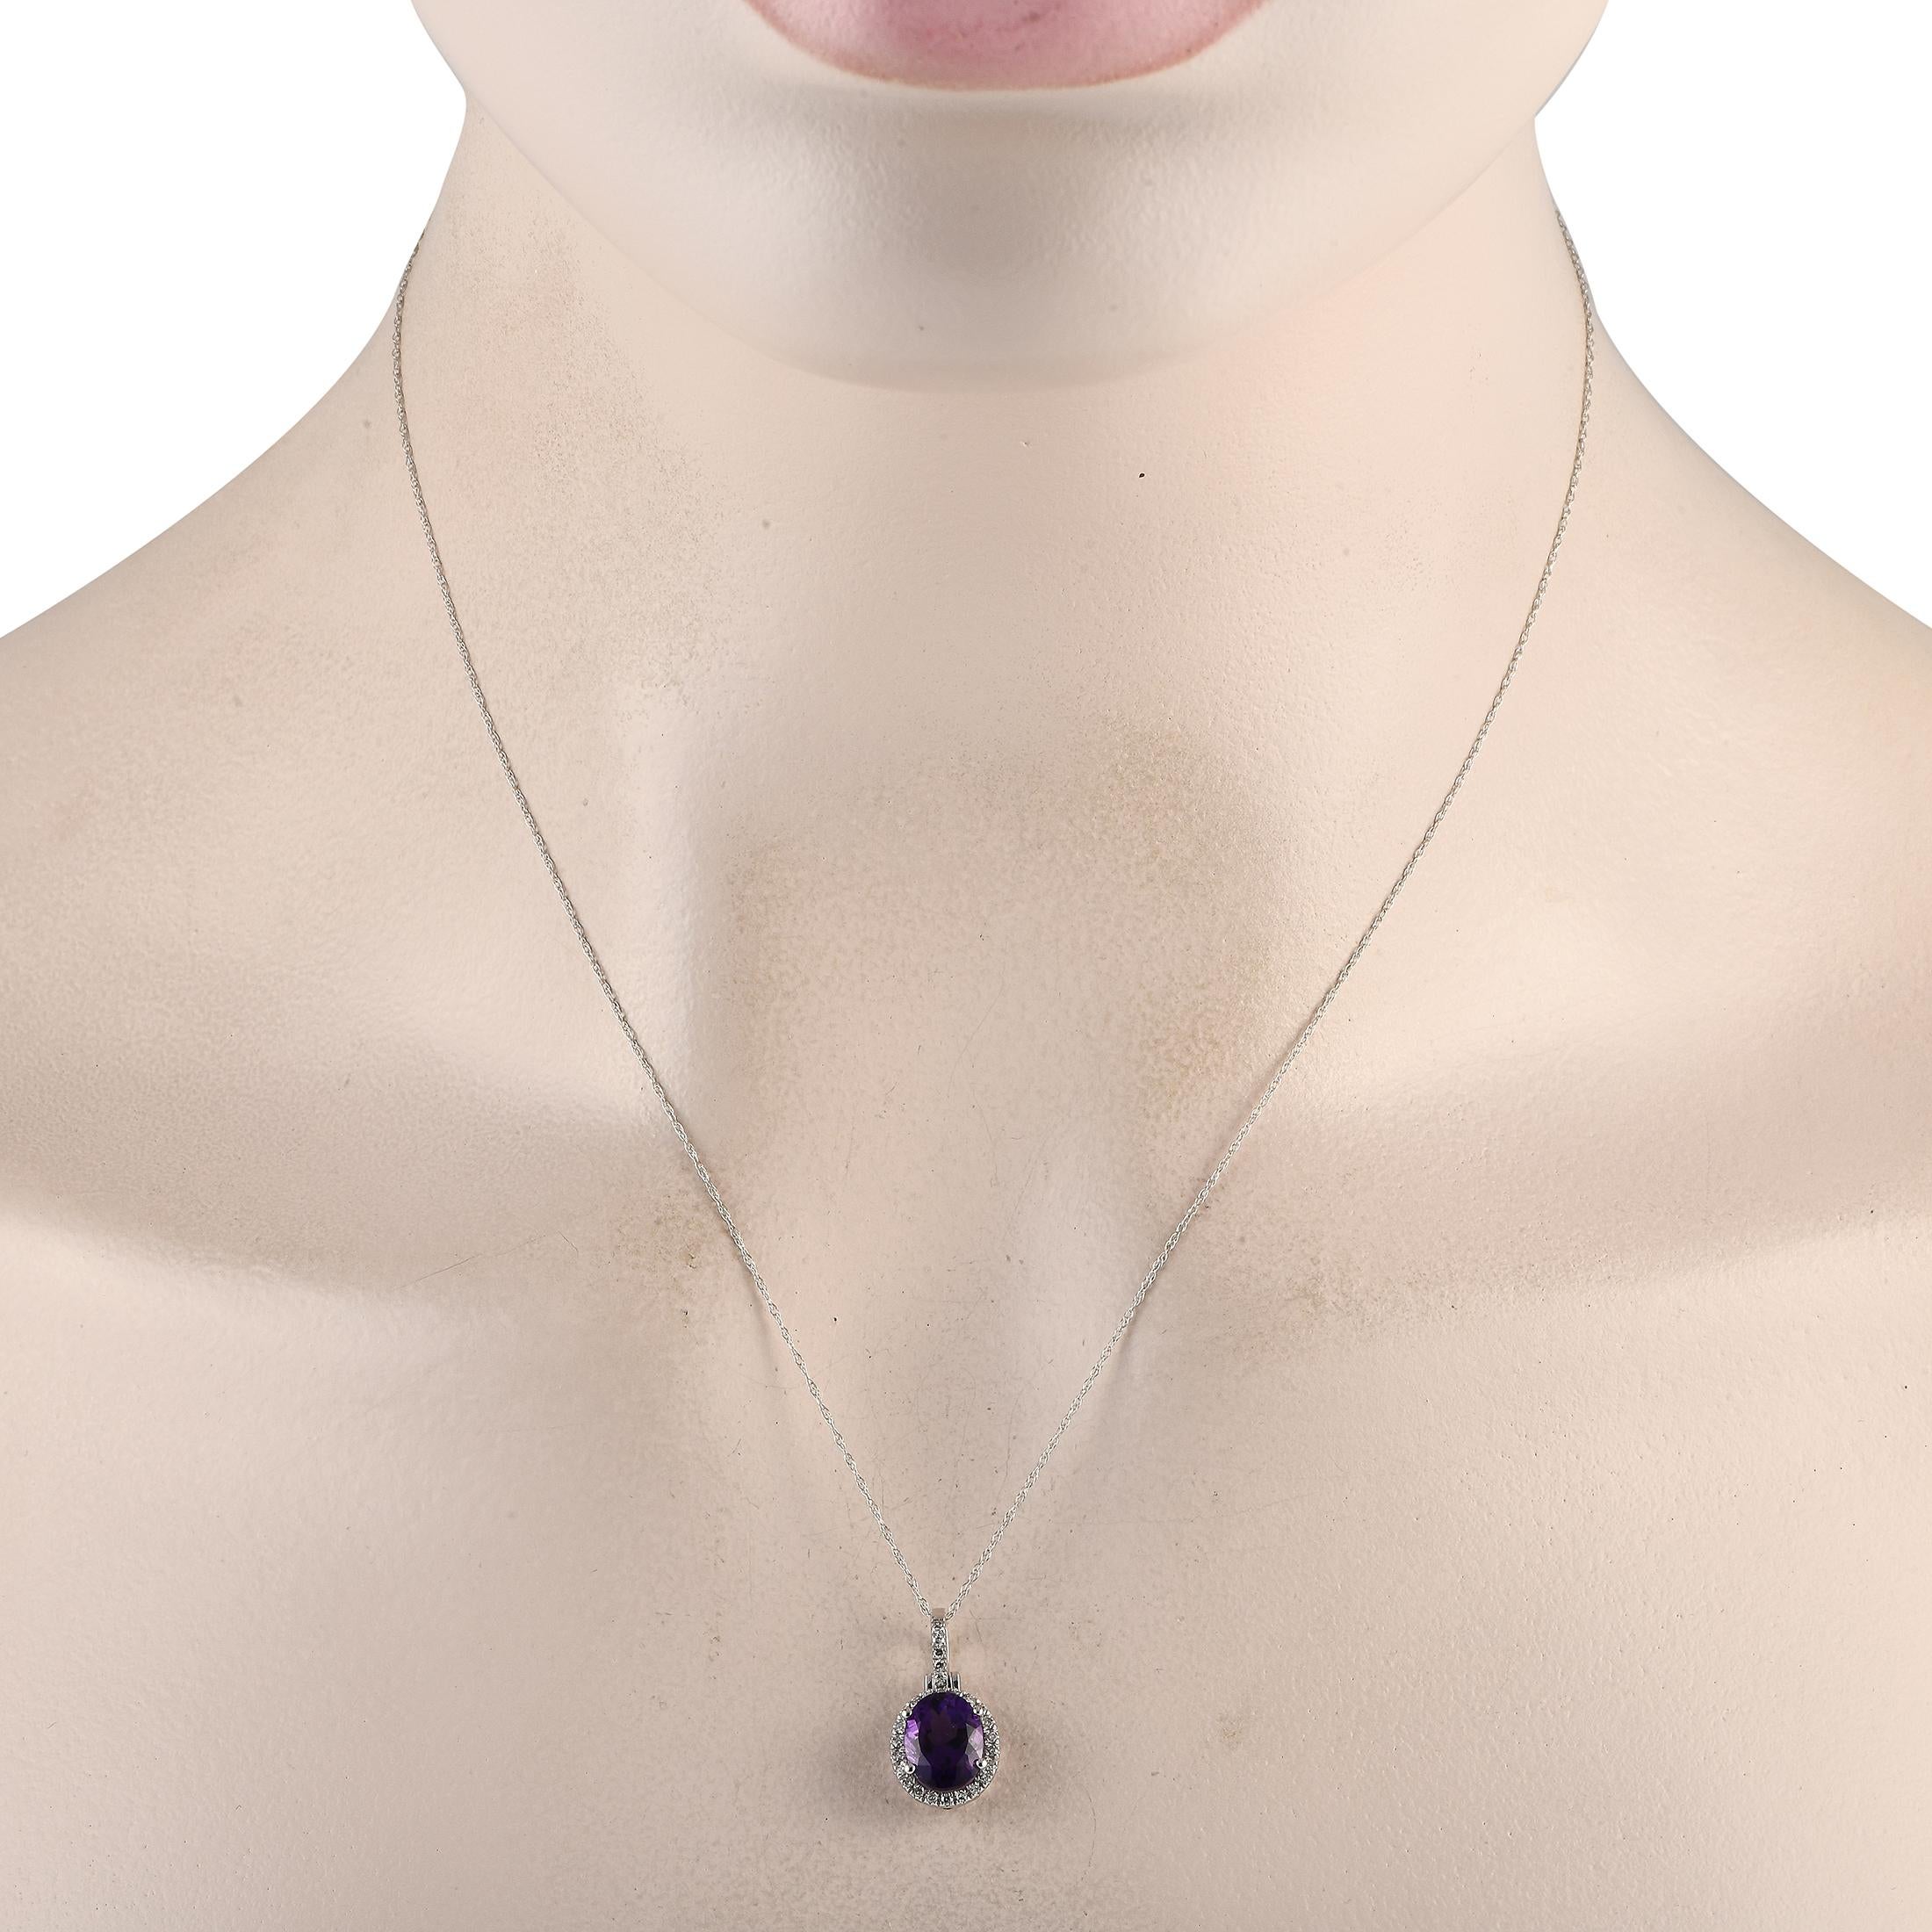 Add elegance to any ensemble with this impeccably crafted necklace. Crafted from 14K White Gold, this piece features a stunning Amethyst center stone and Diamond accents with a total weight of 0.13 carats. The pendant measures 0.75 long by 0.45 wide